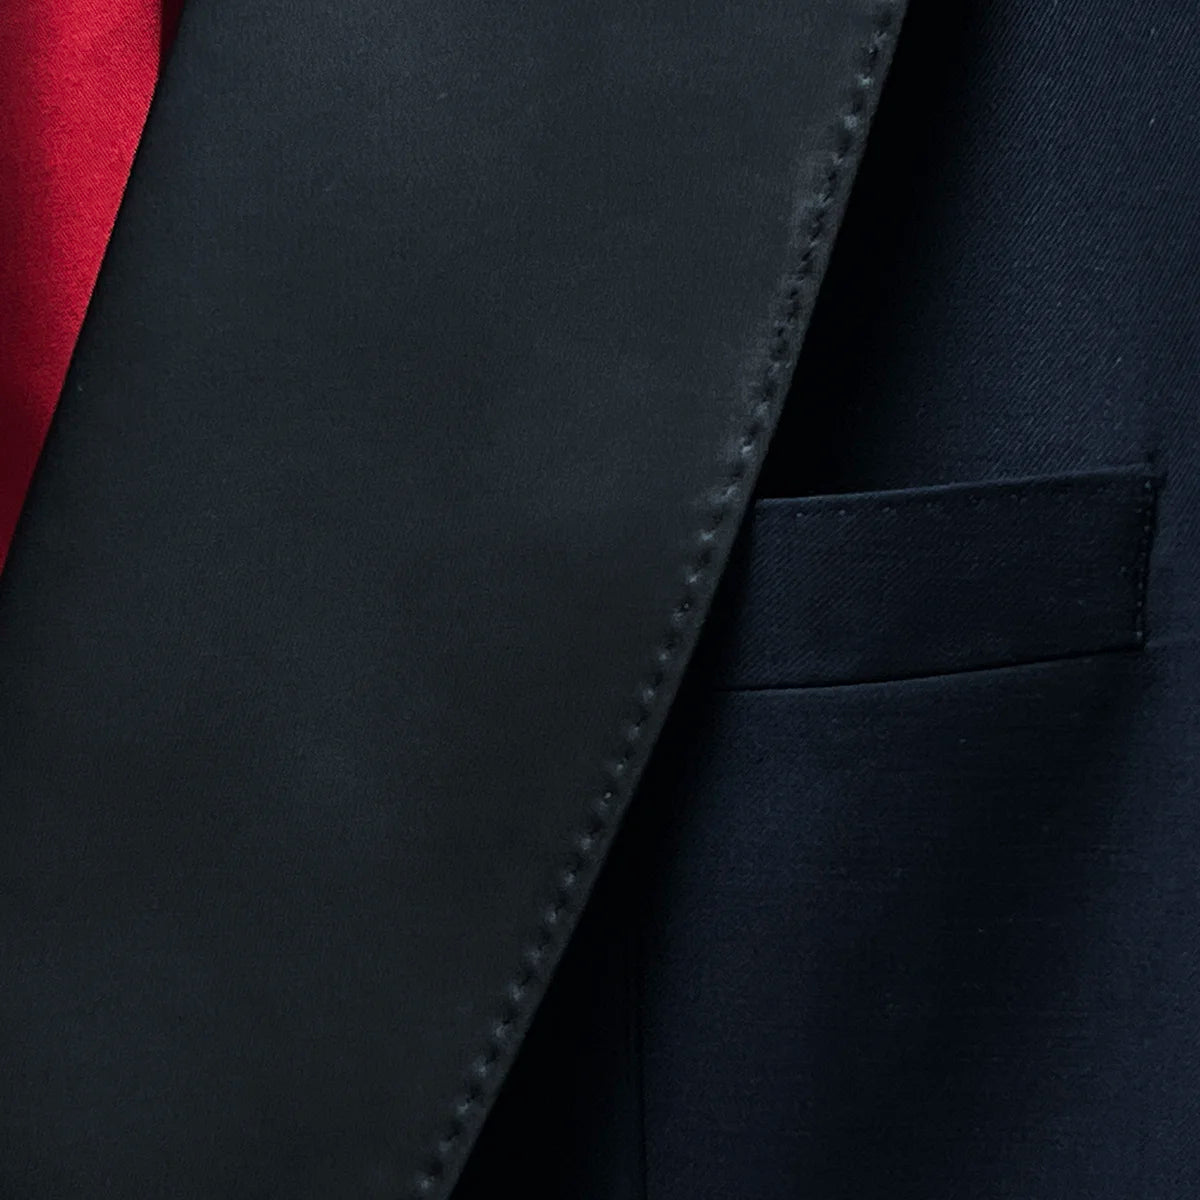 View of the built-in pocket square, adding a touch of elegance to the tuxedo.